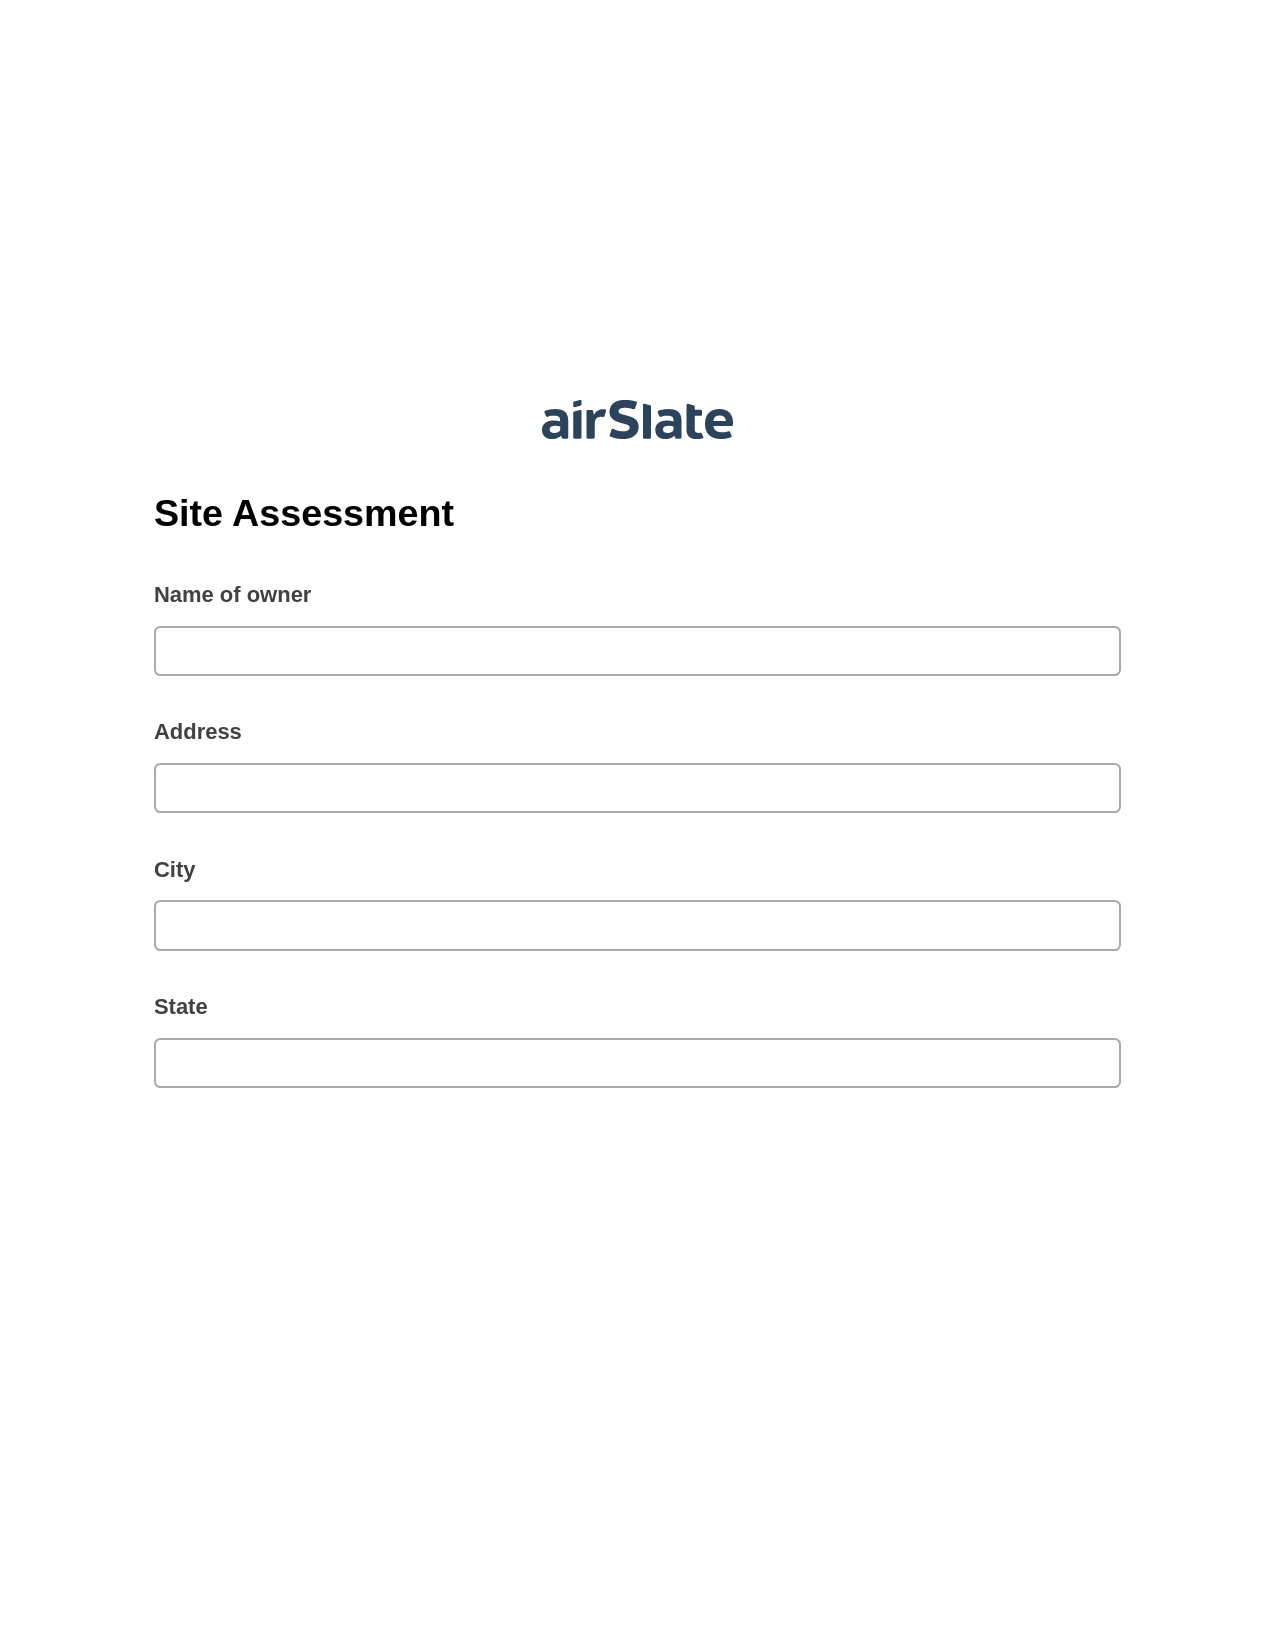 Site Assessment Pre-fill from Salesforce Record Bot, Unassign Role Bot, Export to MySQL Bot